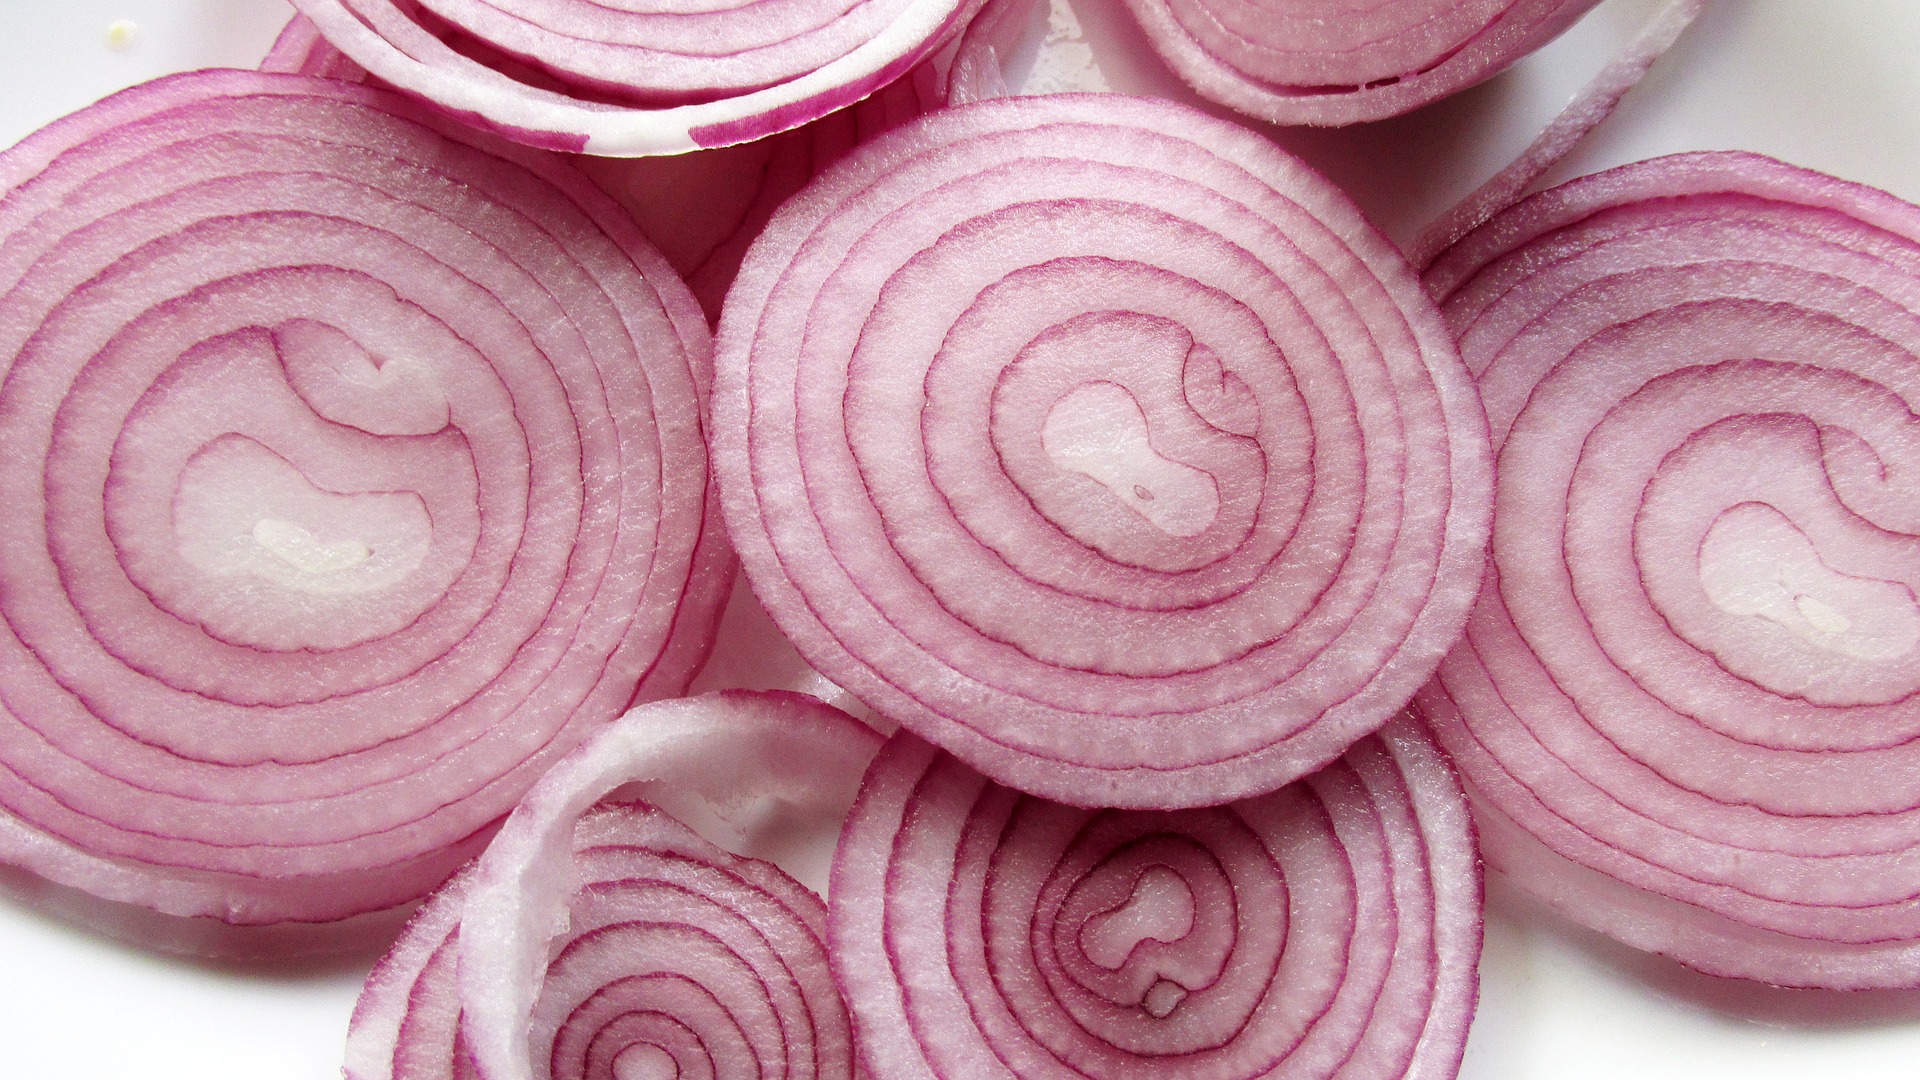 What To Do With Onions